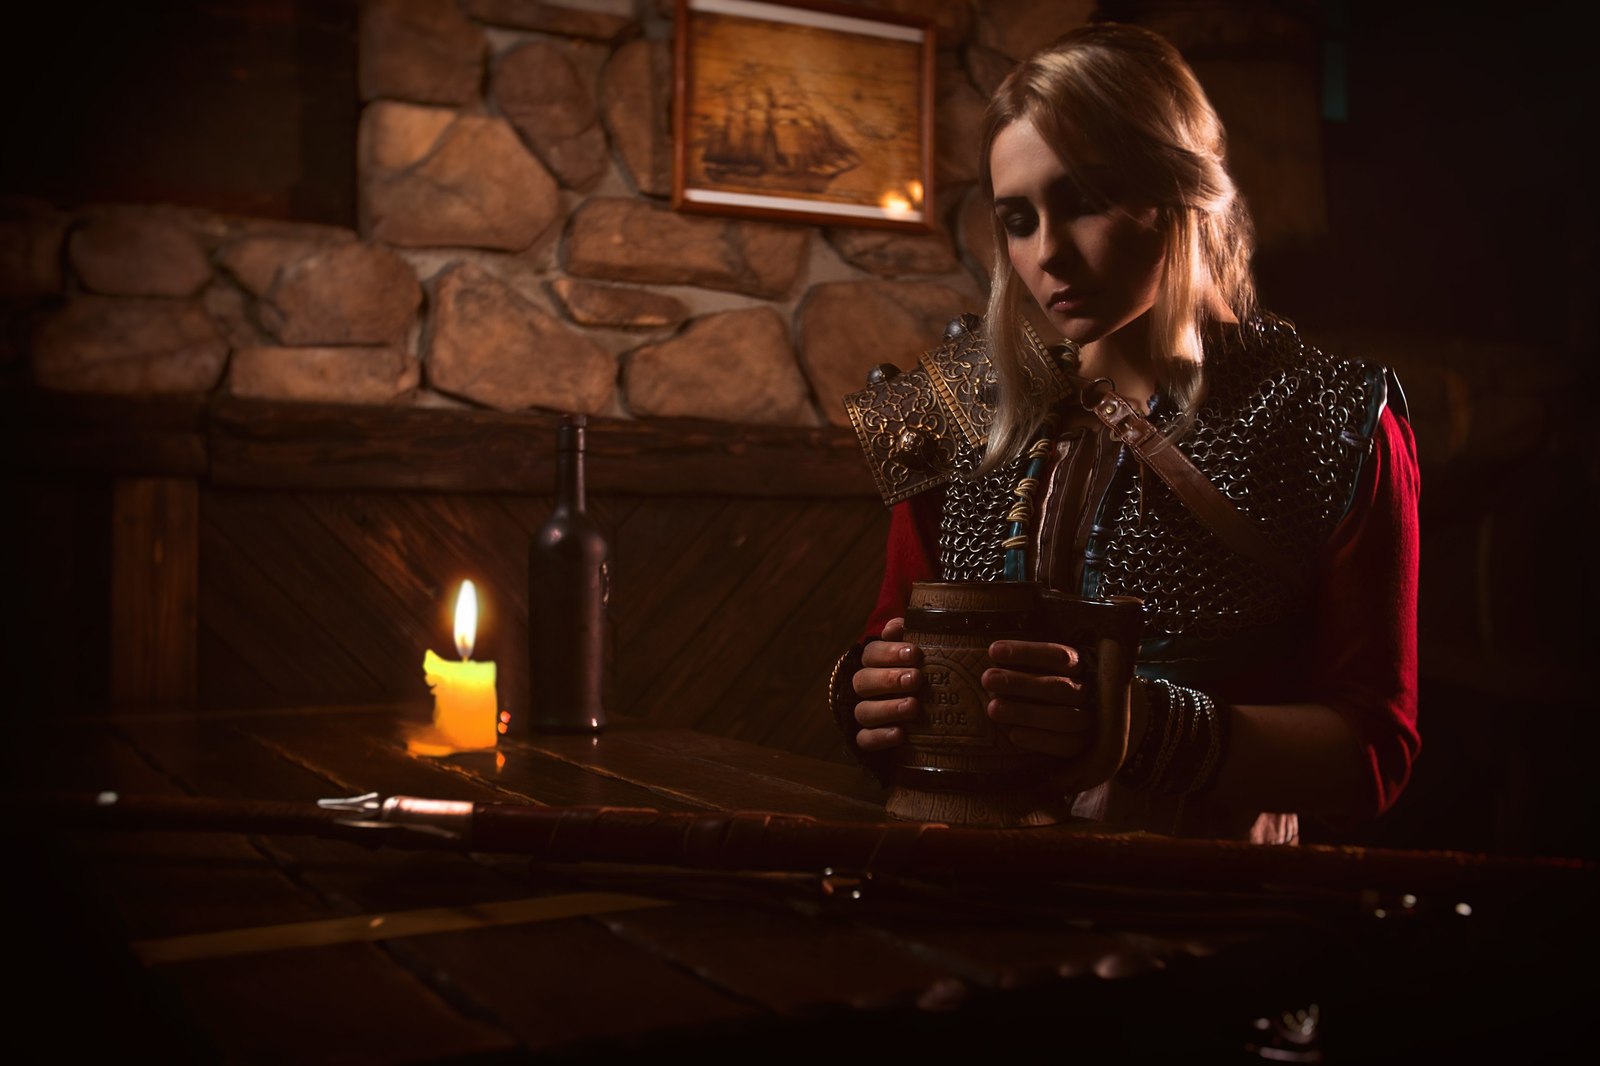 Friday tavern - evening gatherings of Ciri and Triss. - My, Cosplay, Russian cosplay, Witcher, The Witcher 3: Wild Hunt, Girls, Friday tag is mine, Gamers, Longpost